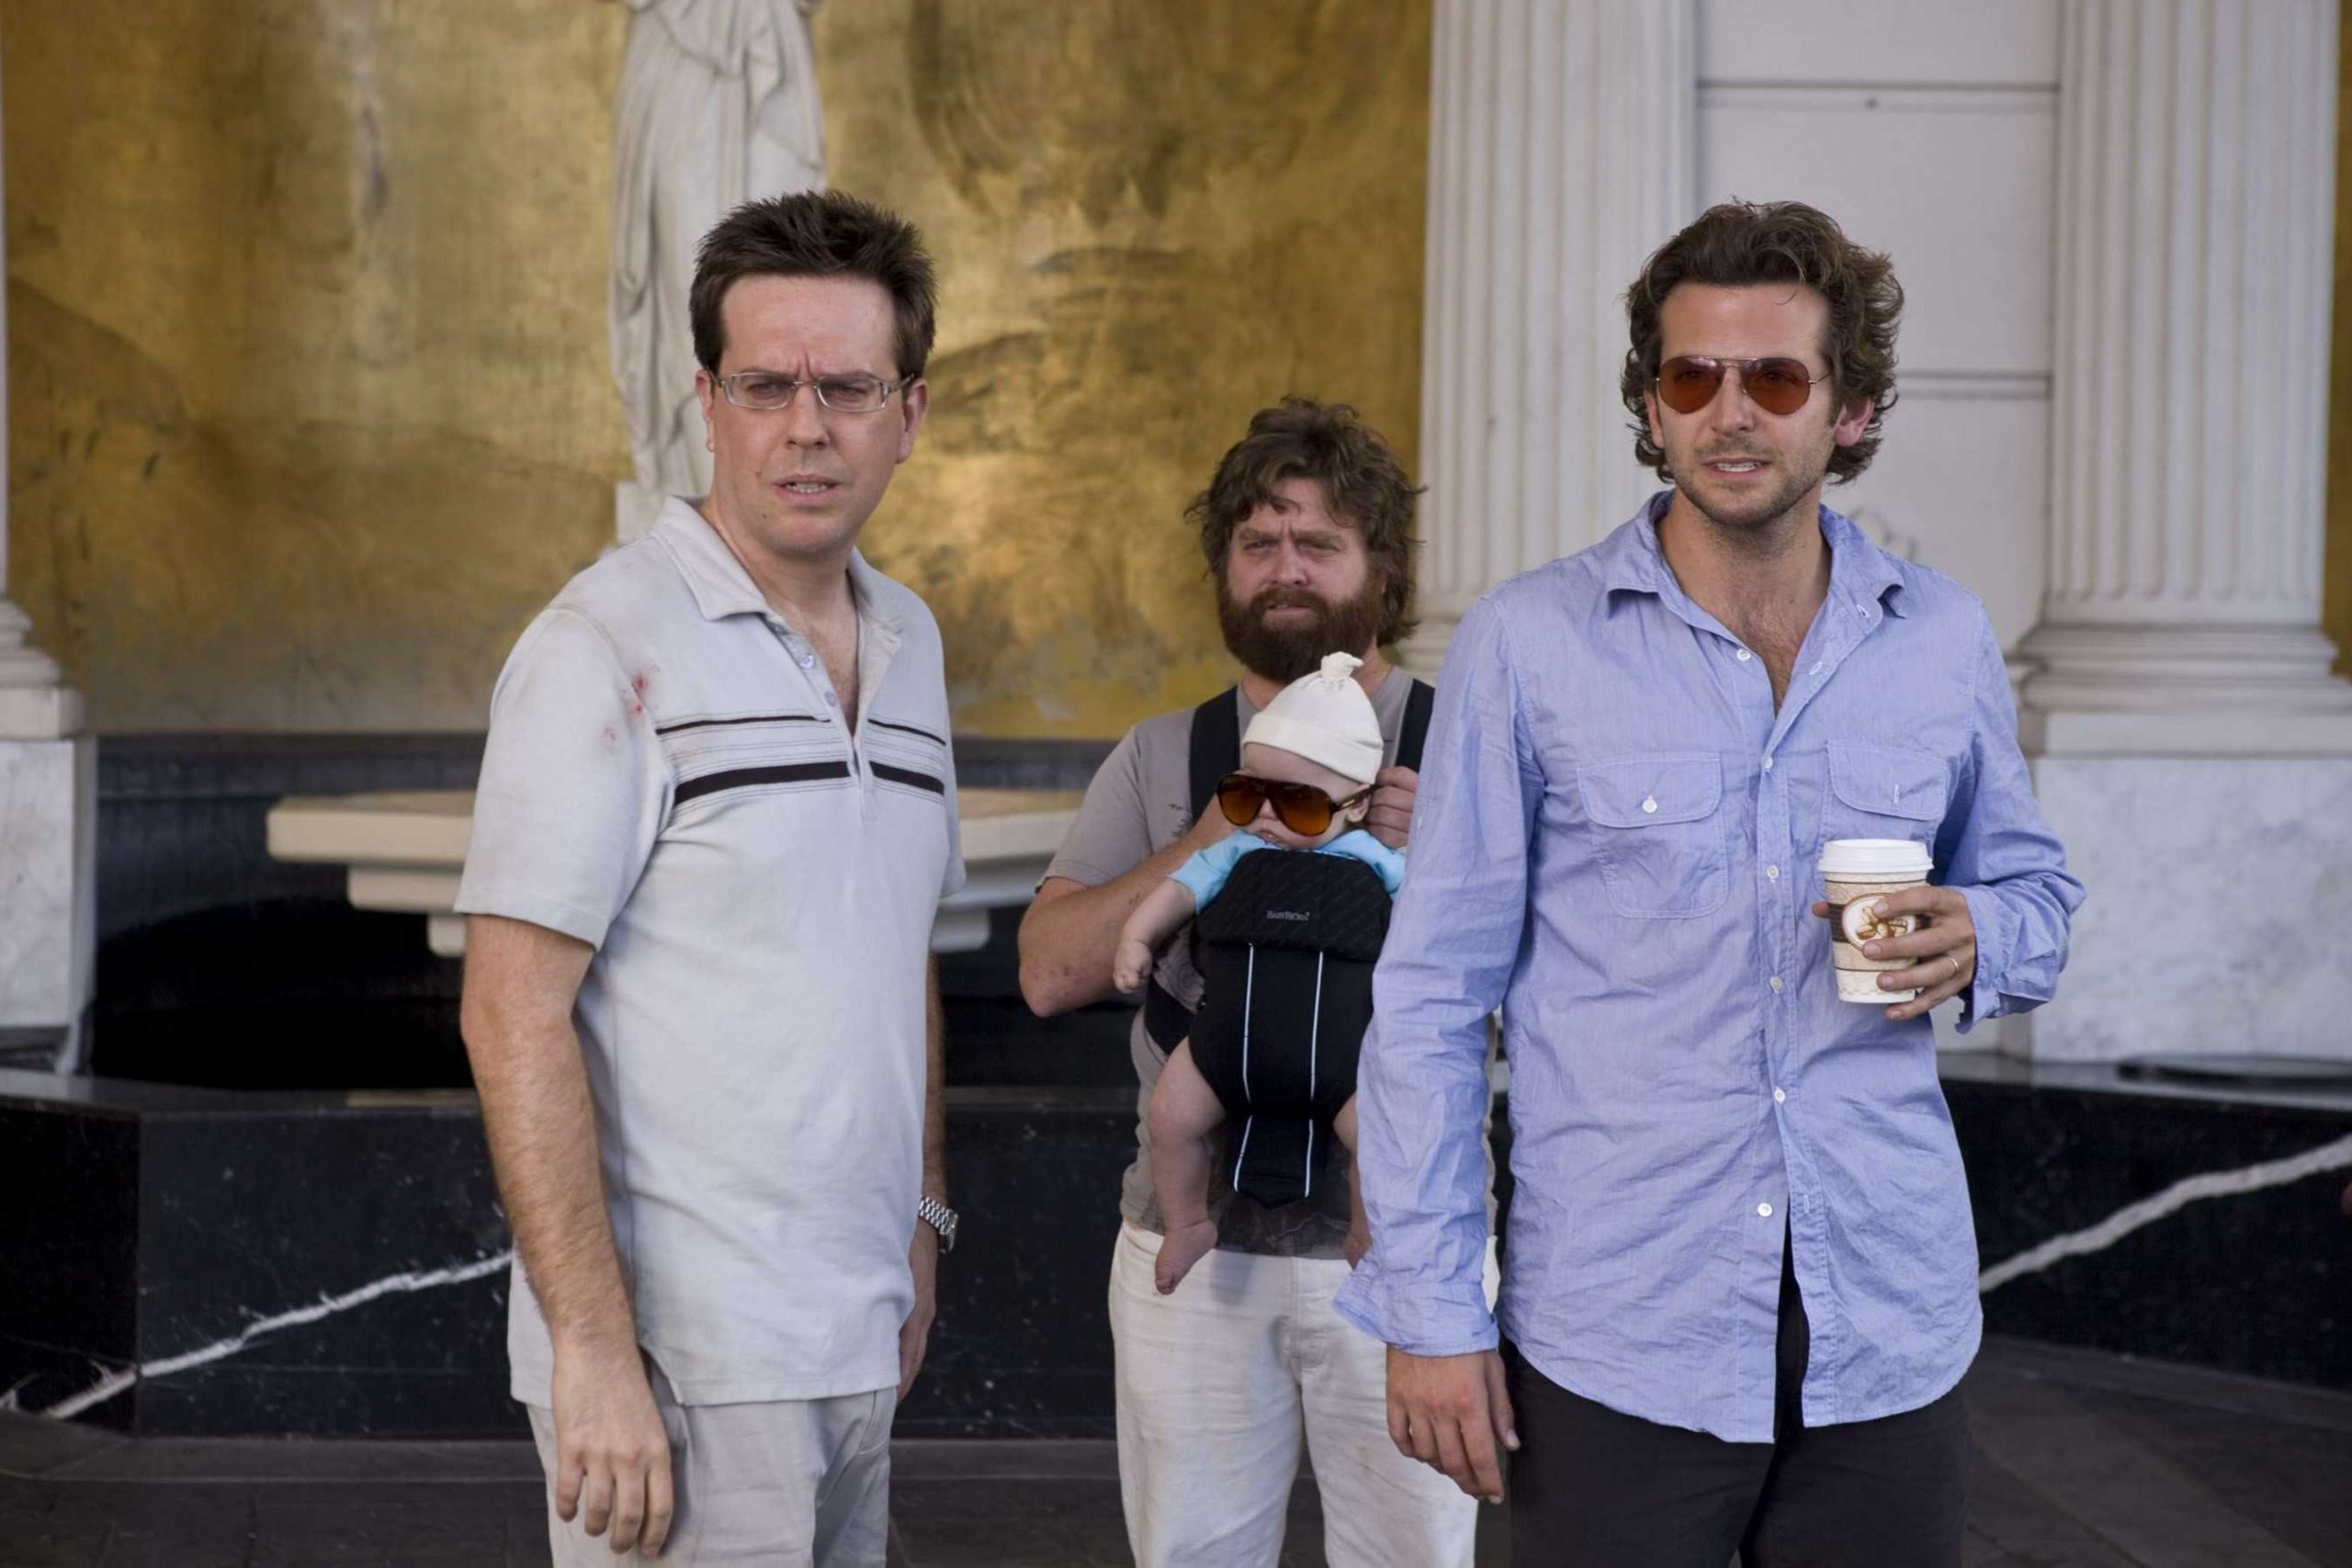 the hangover movie review